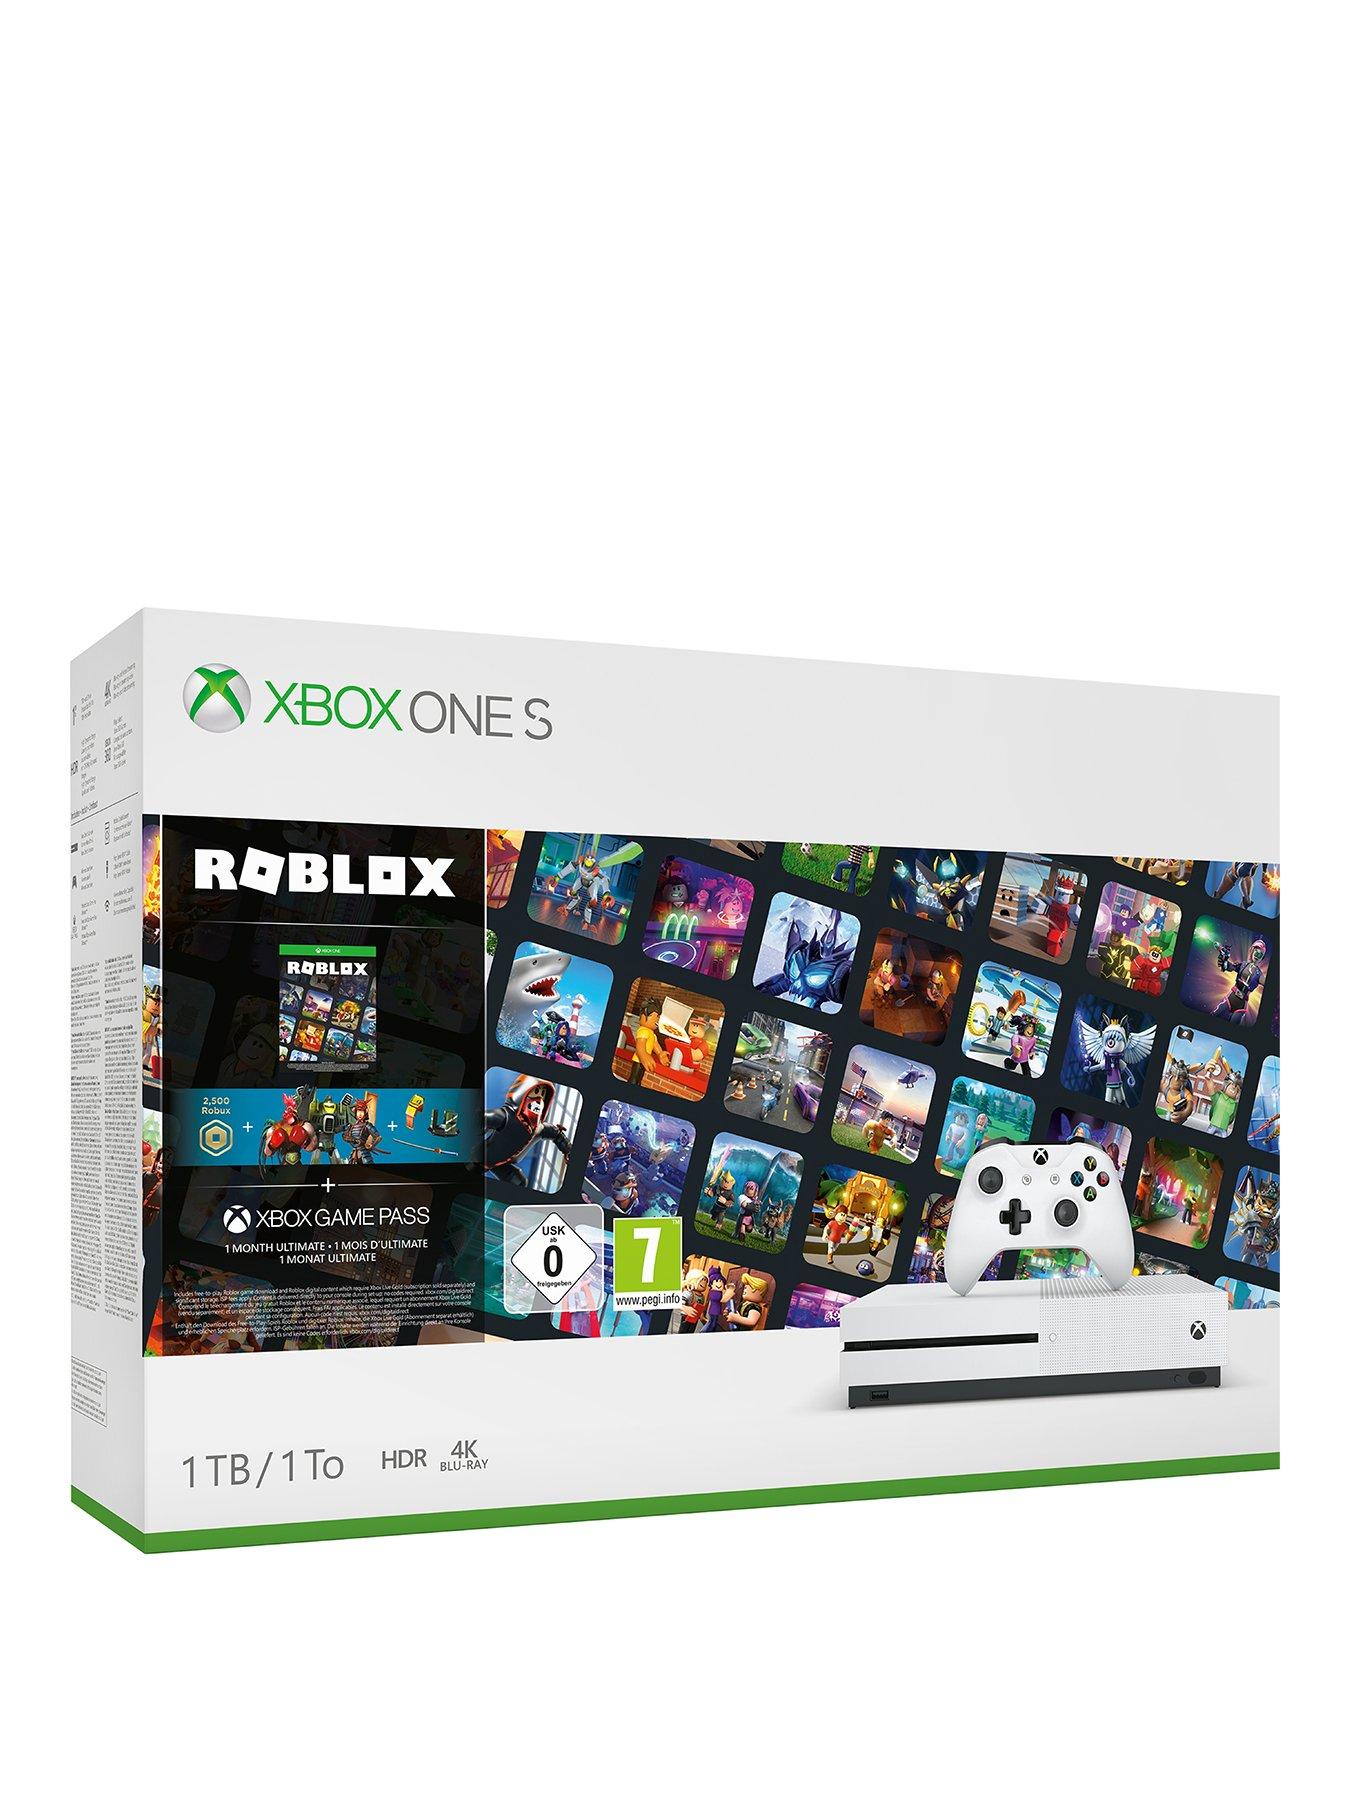 Latest Offers Xbox One S Www Littlewoodsireland Ie - crown rolf robux